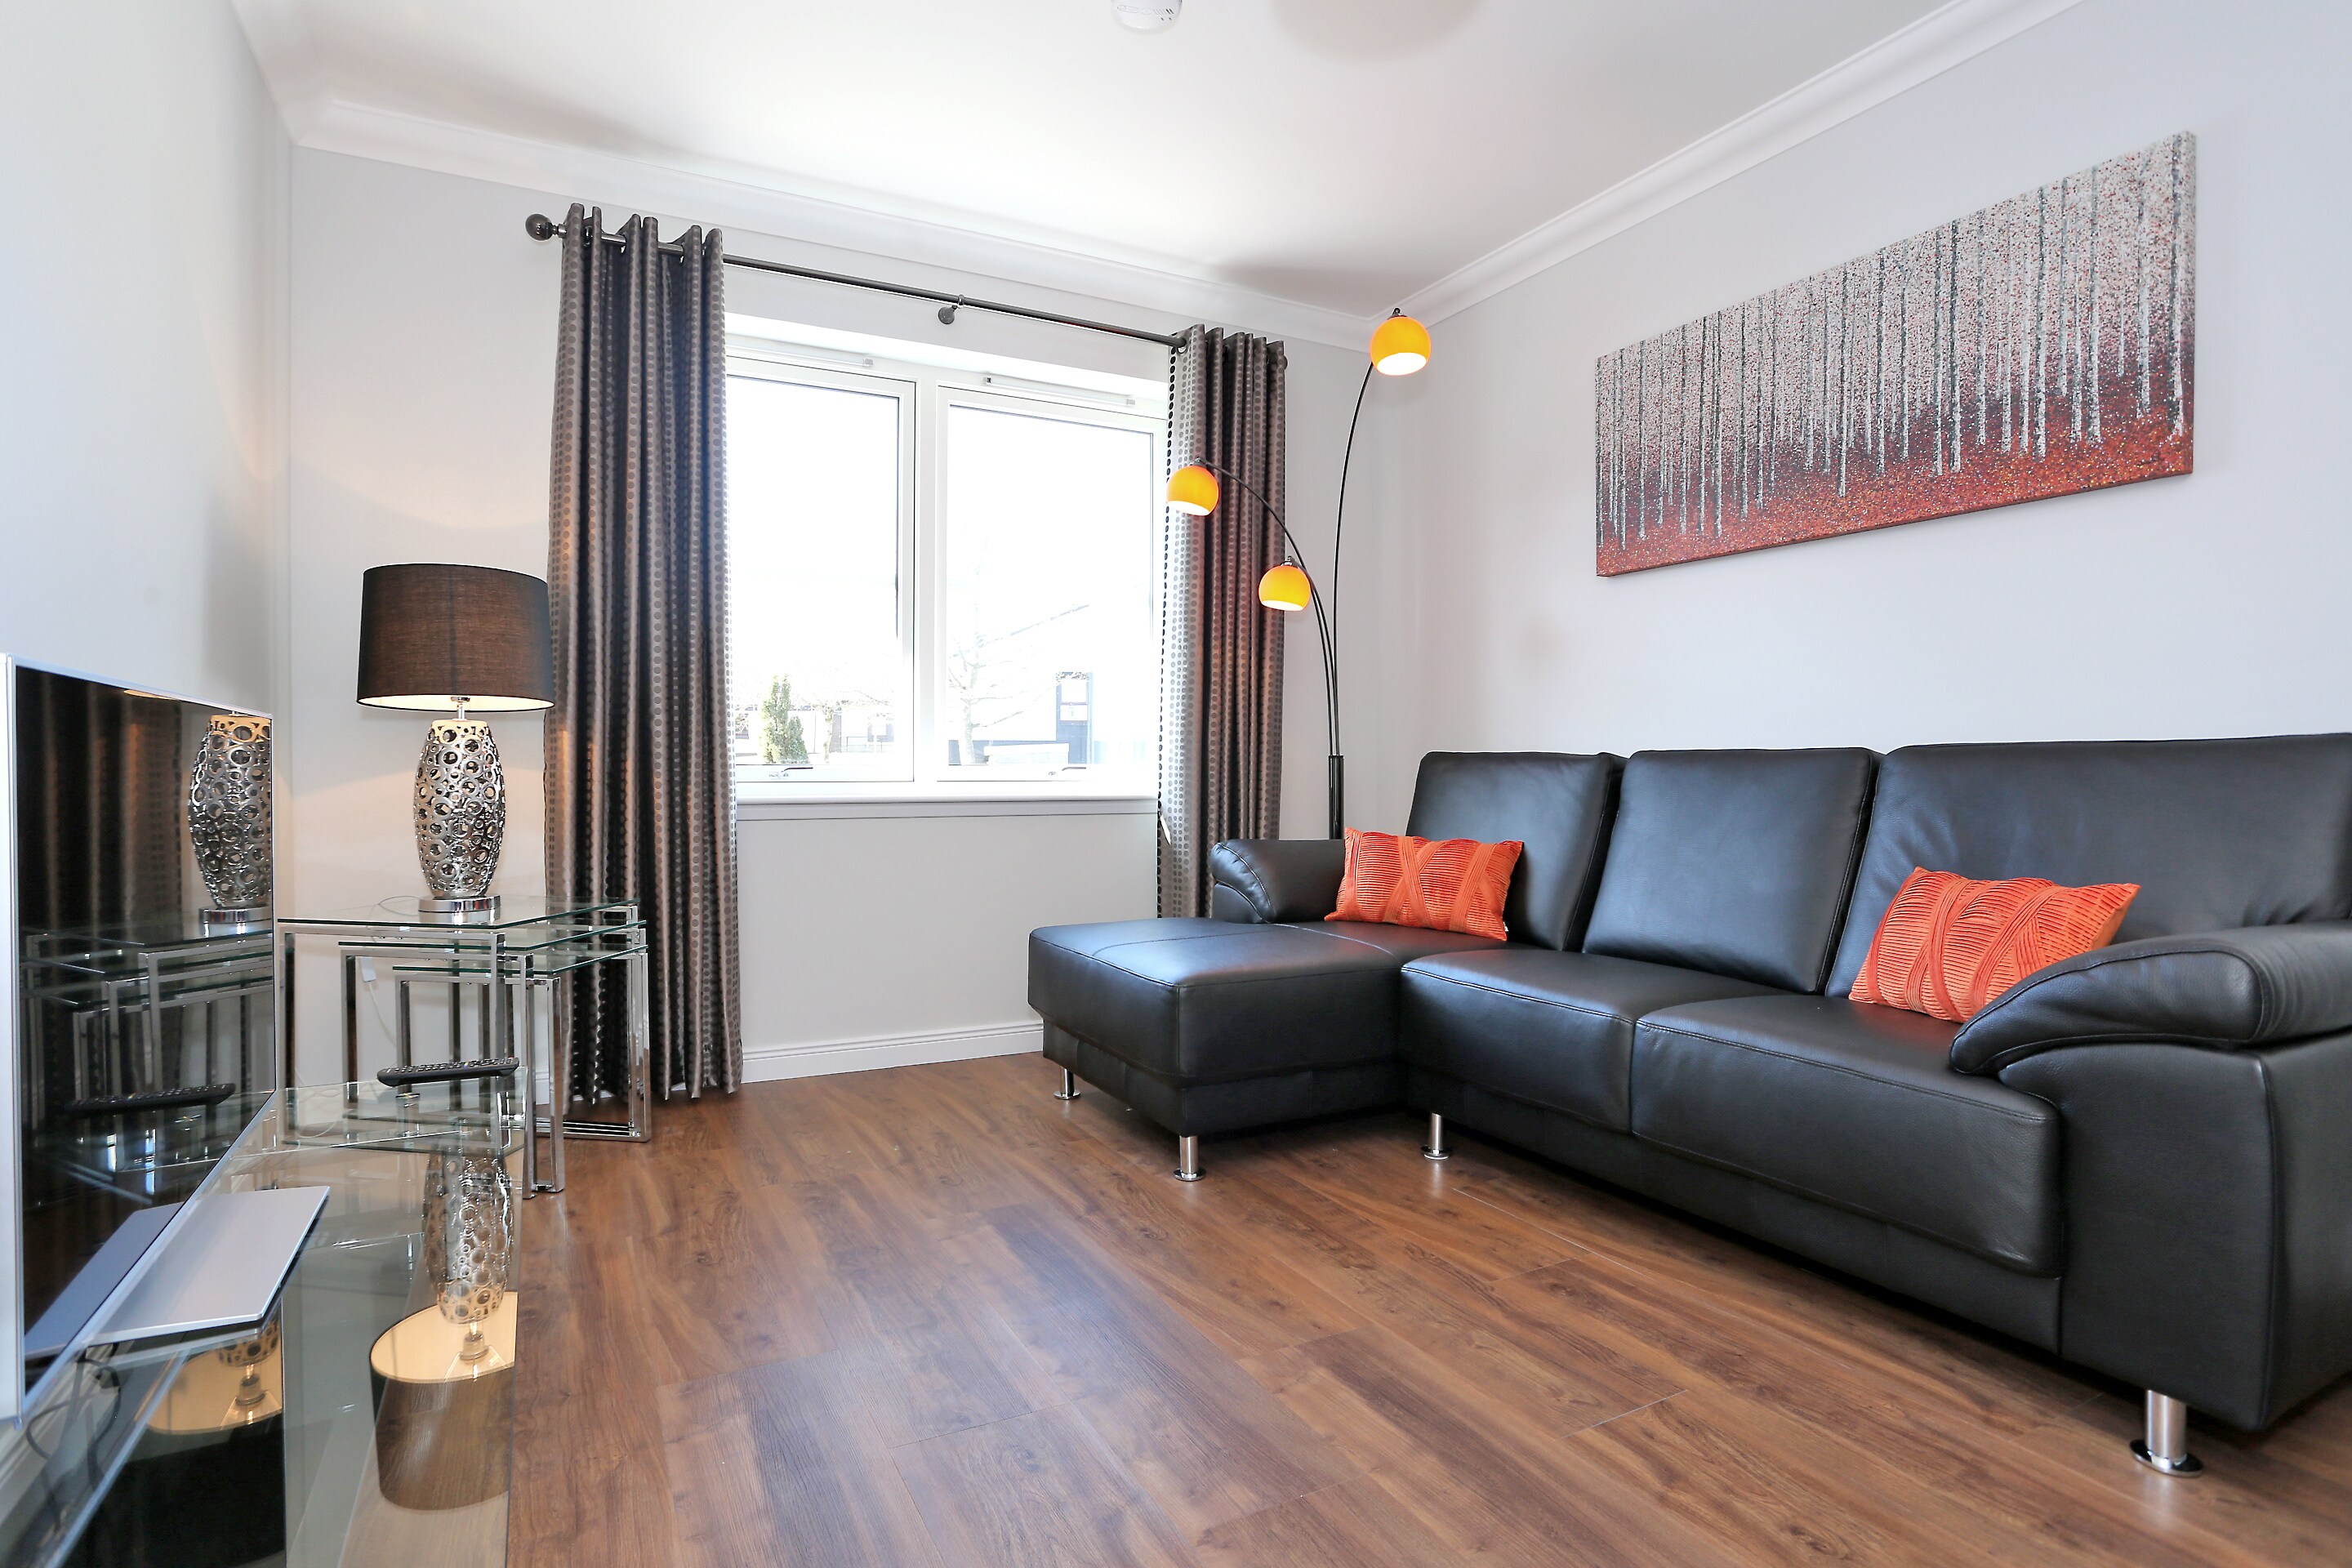 Property Image 1 - Stylish two bedroom apartment in Inverurie, Scotland